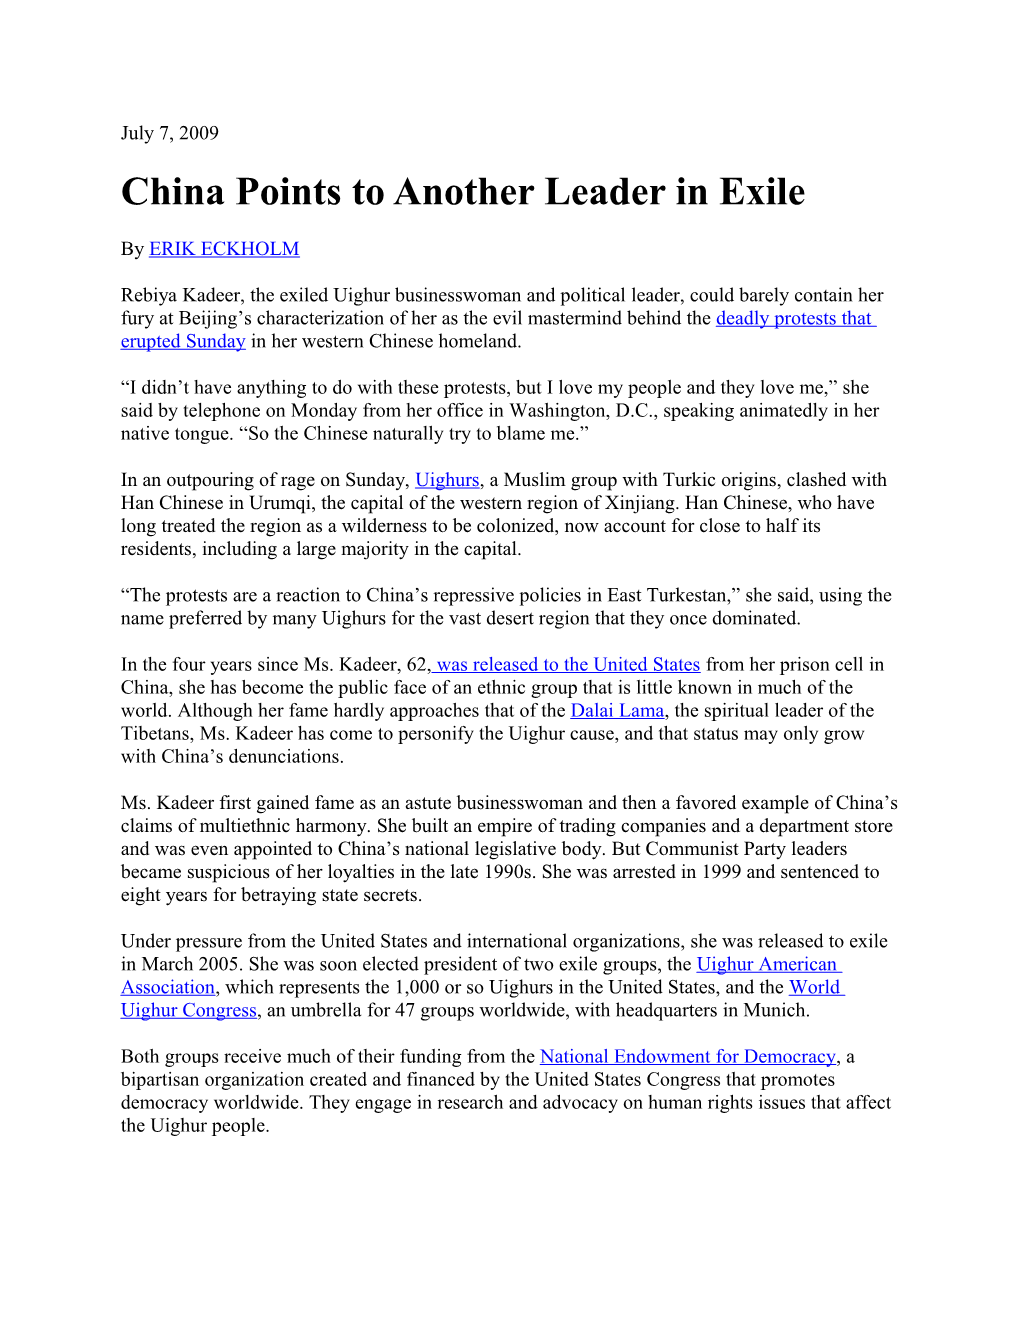 China Points to Another Leader in Exile